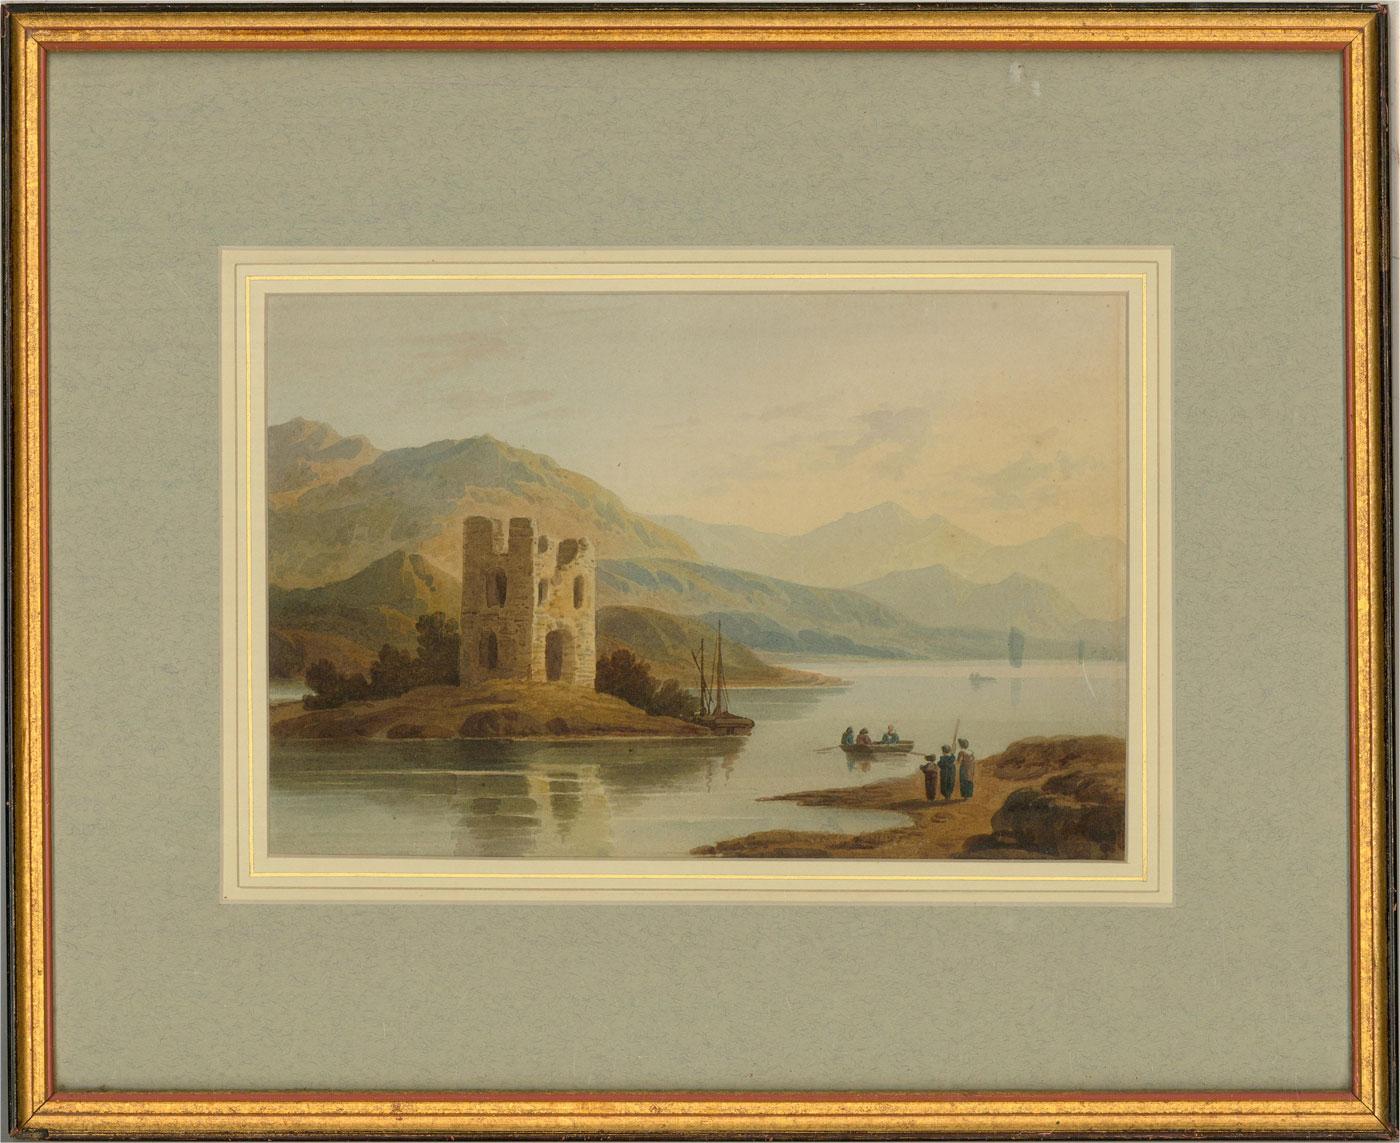 Unknown Landscape Art - Early 19th Century Watercolour - Highland Ruin